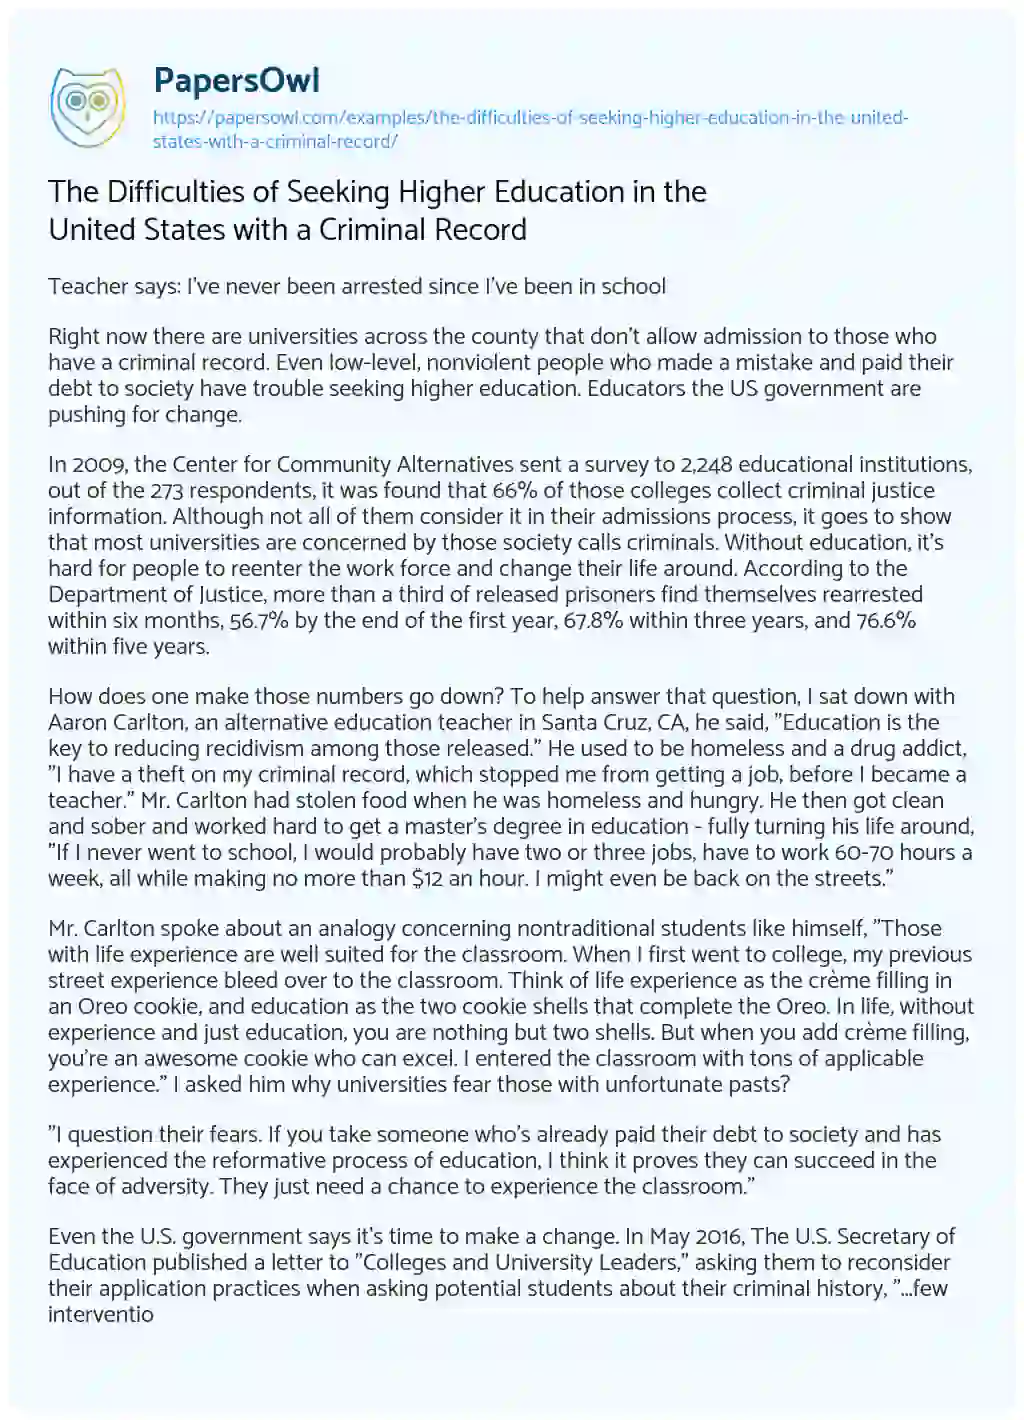 Essay on The Difficulties of Seeking Higher Education in the United States with a Criminal Record